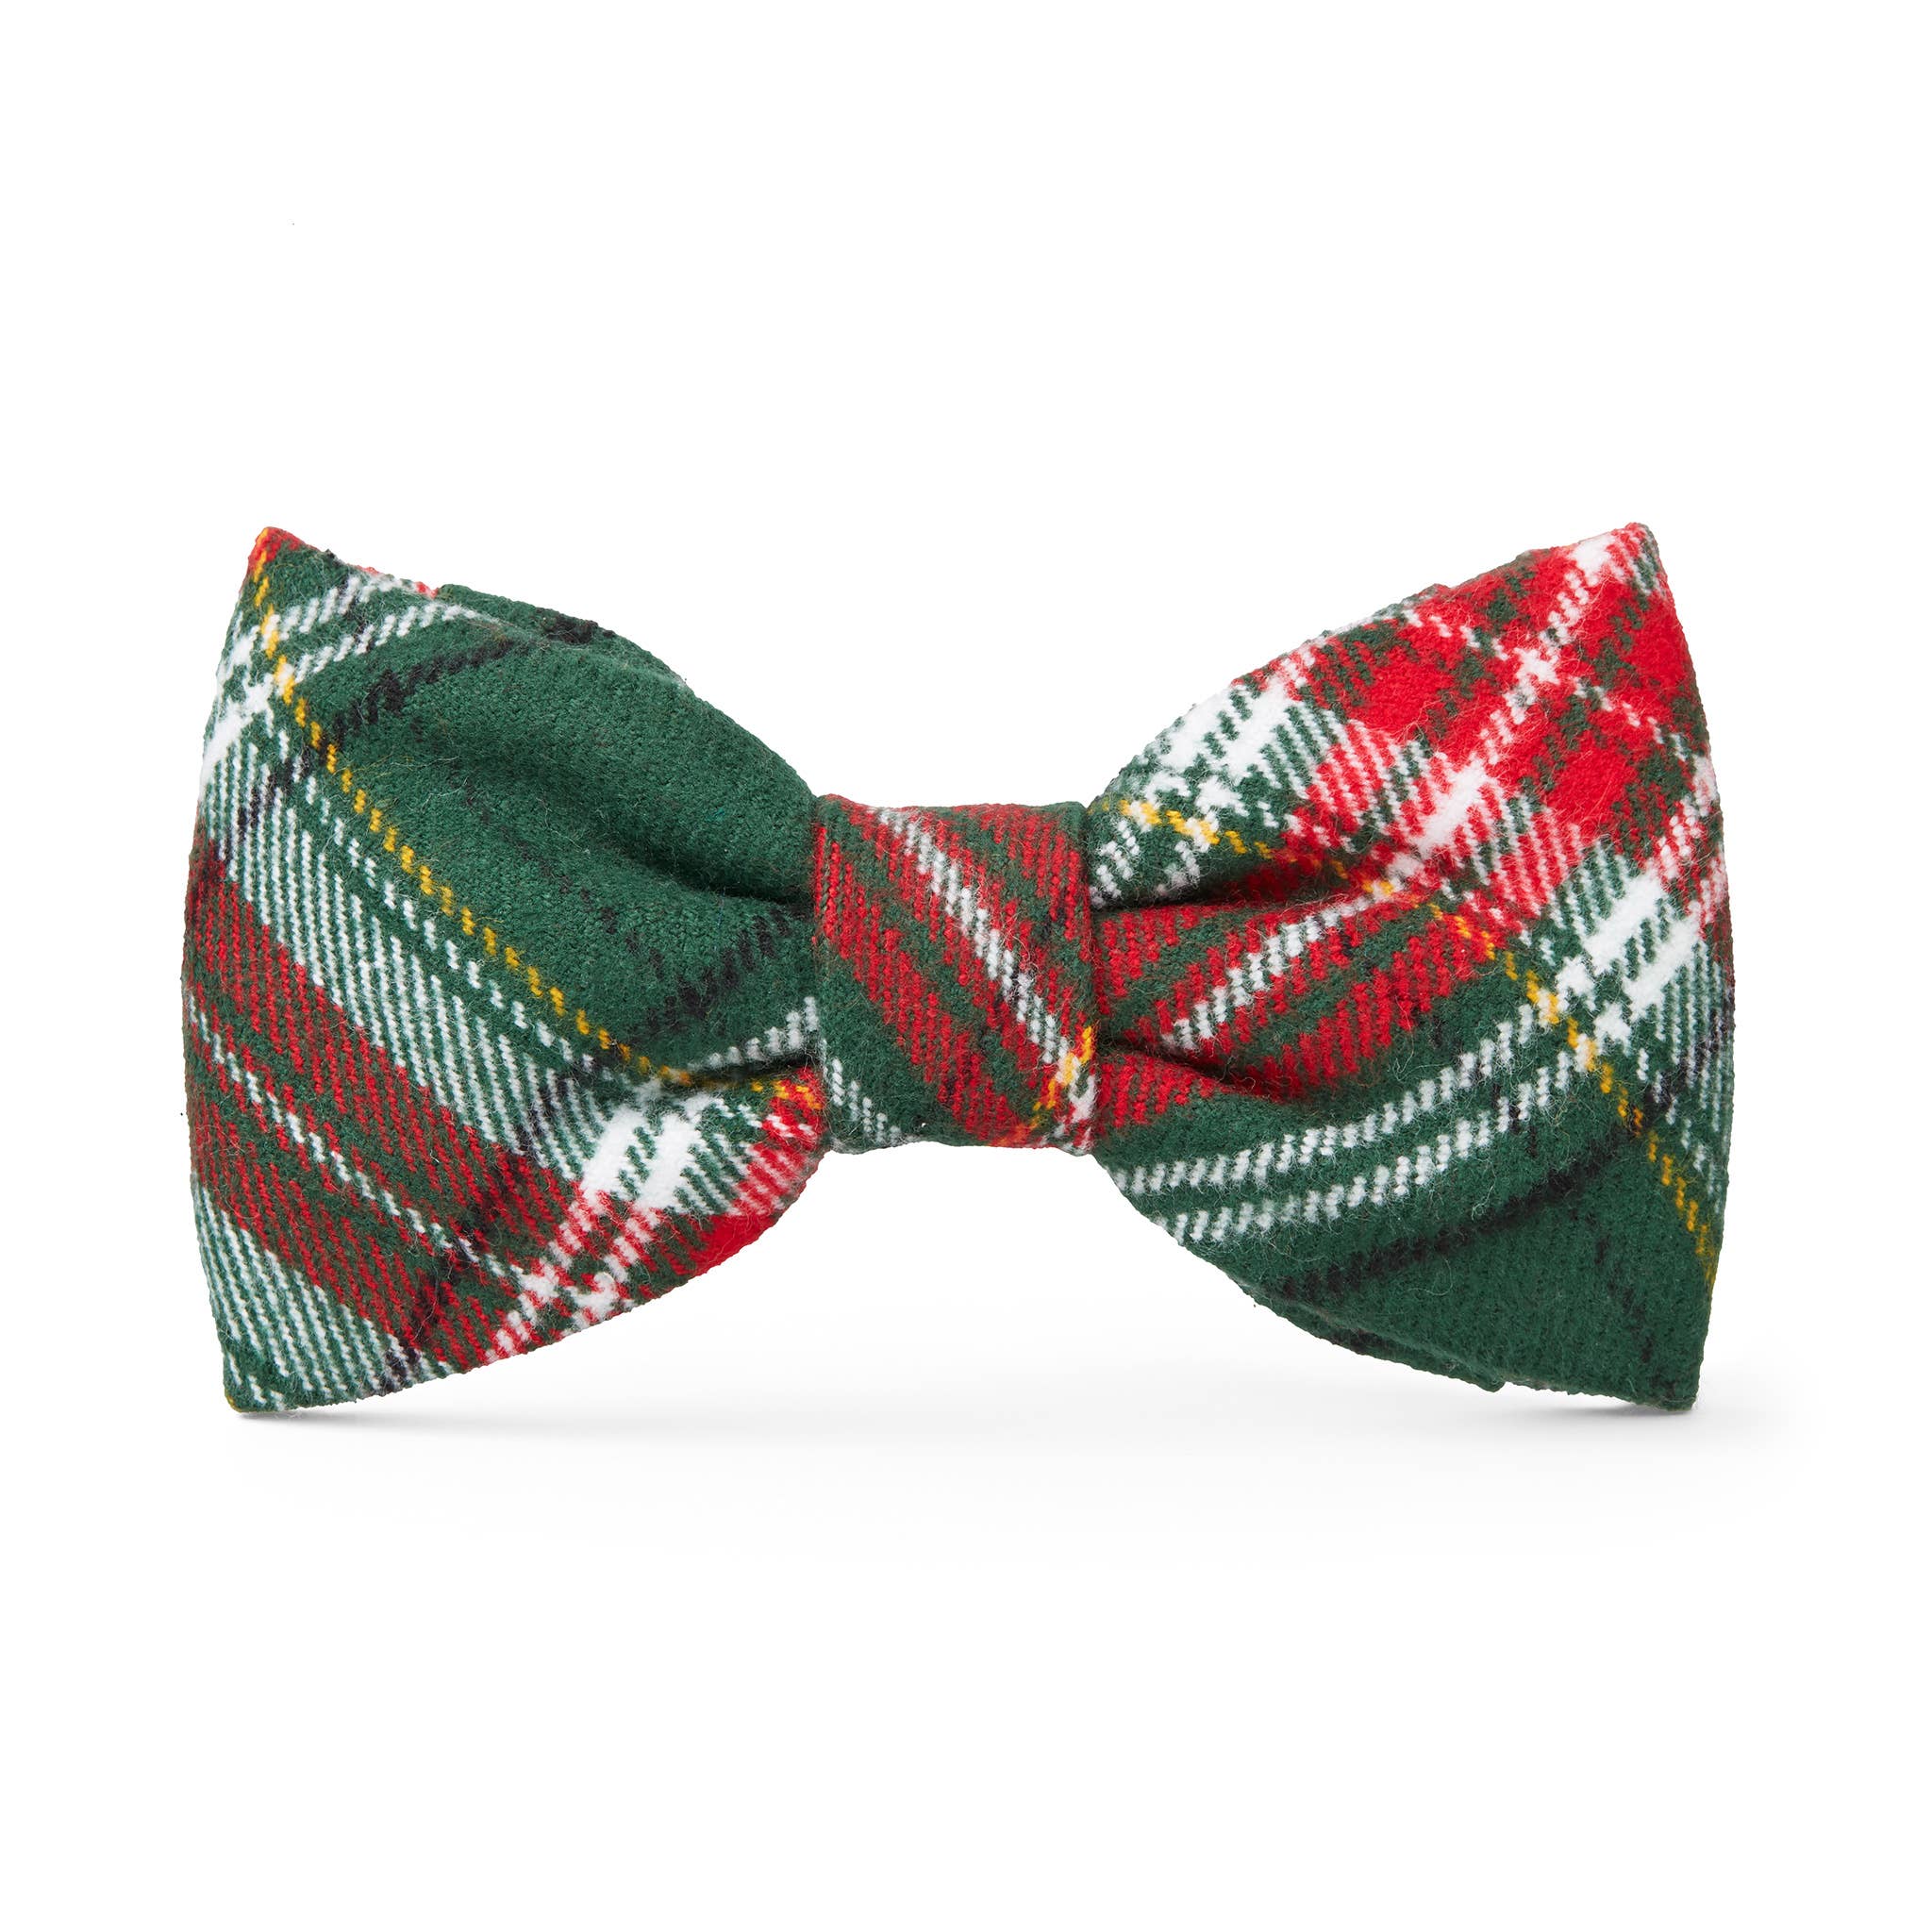 Holly Jolly Flannel Holiday Dog Bow Tie: Standard